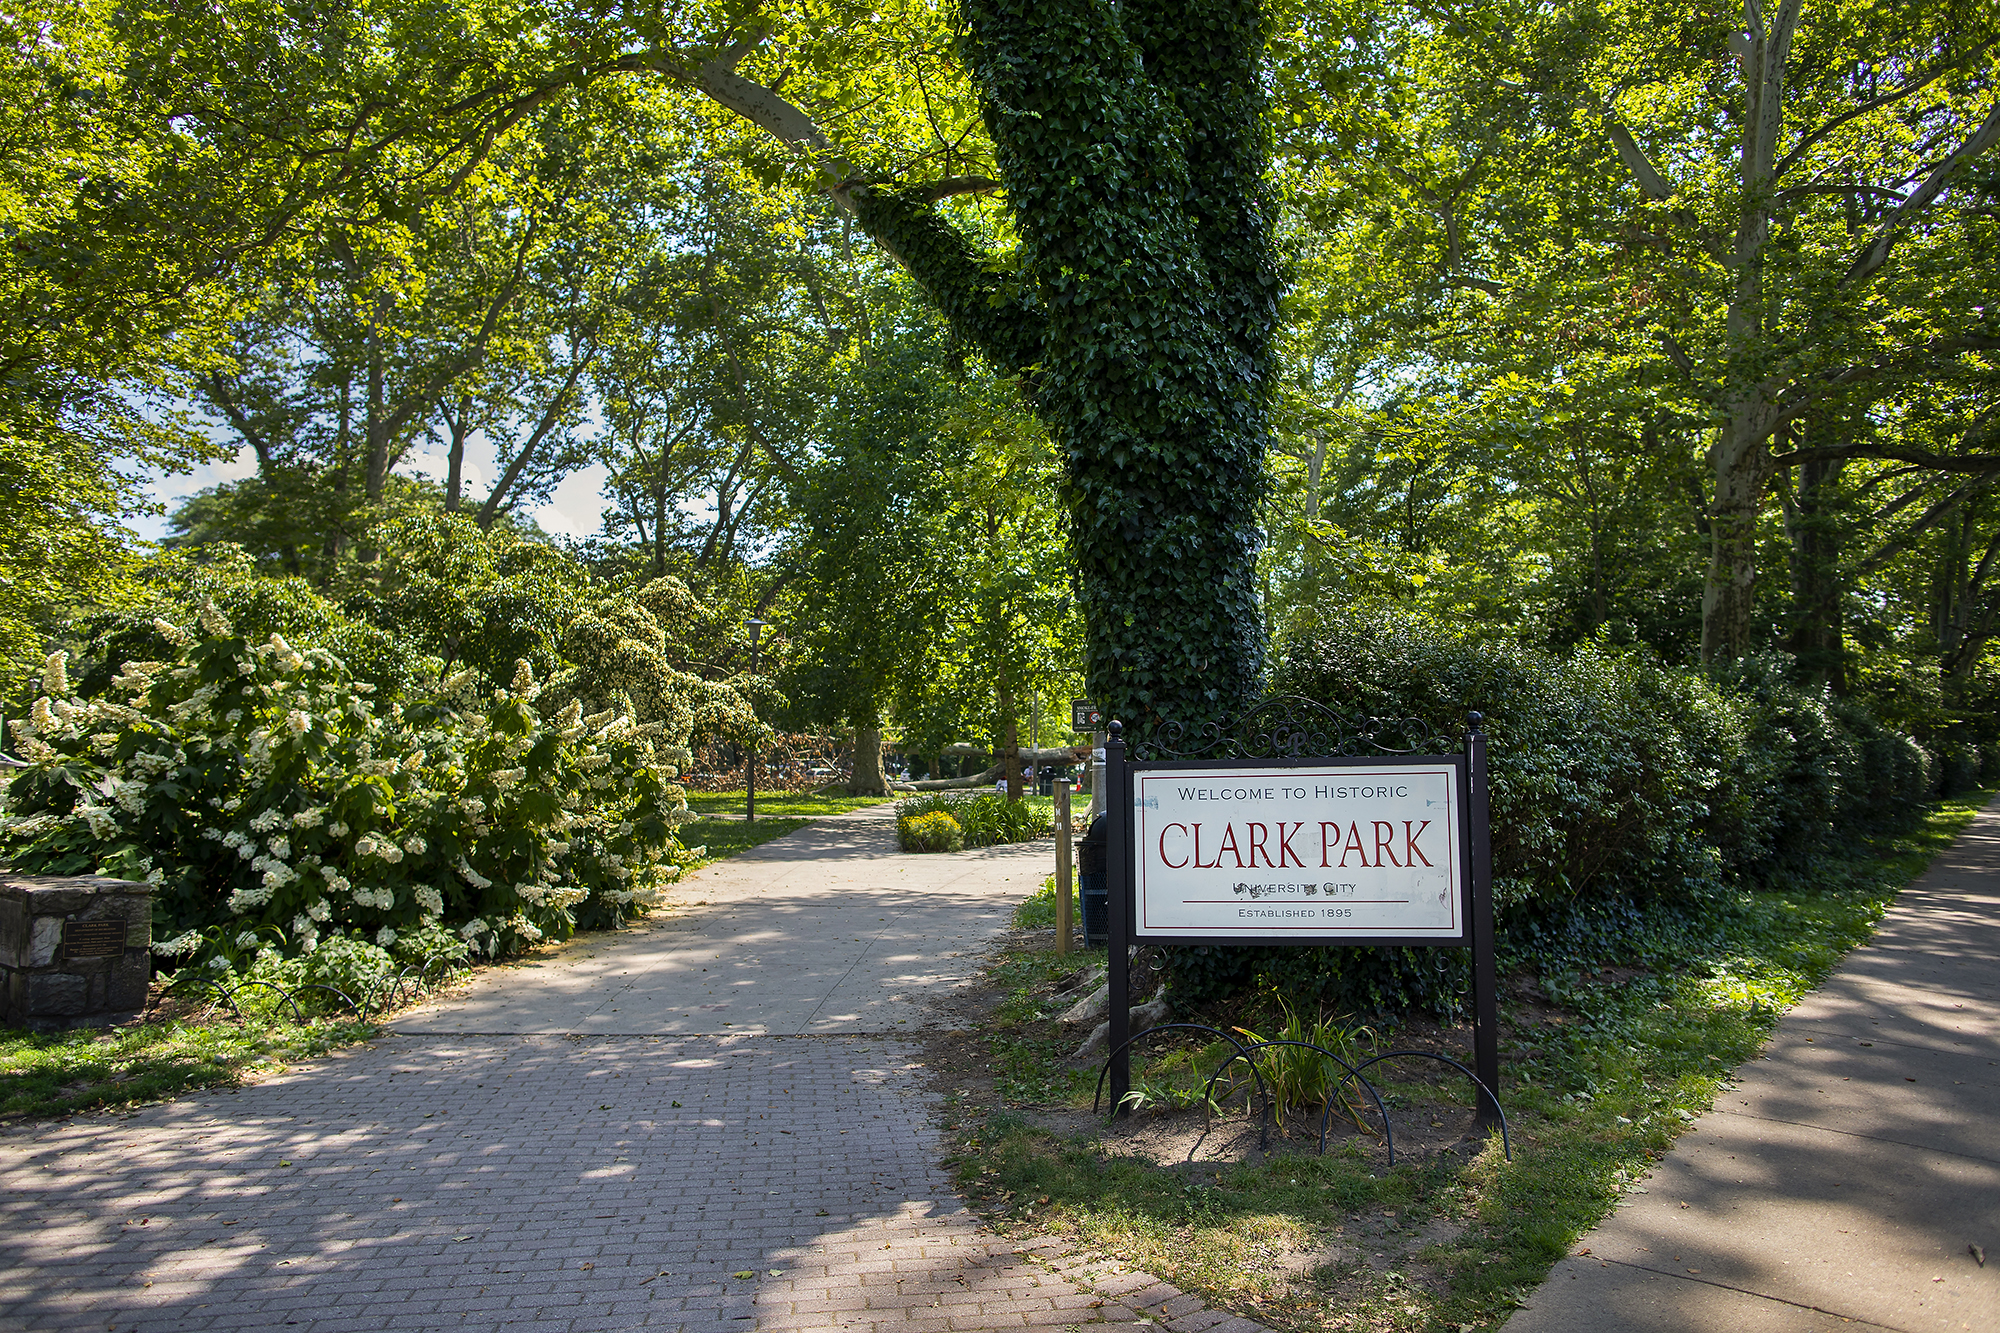 Landscape photo of a park, with a sign that reads "Welcome to Historic Clark Park, University City, Established 1895"